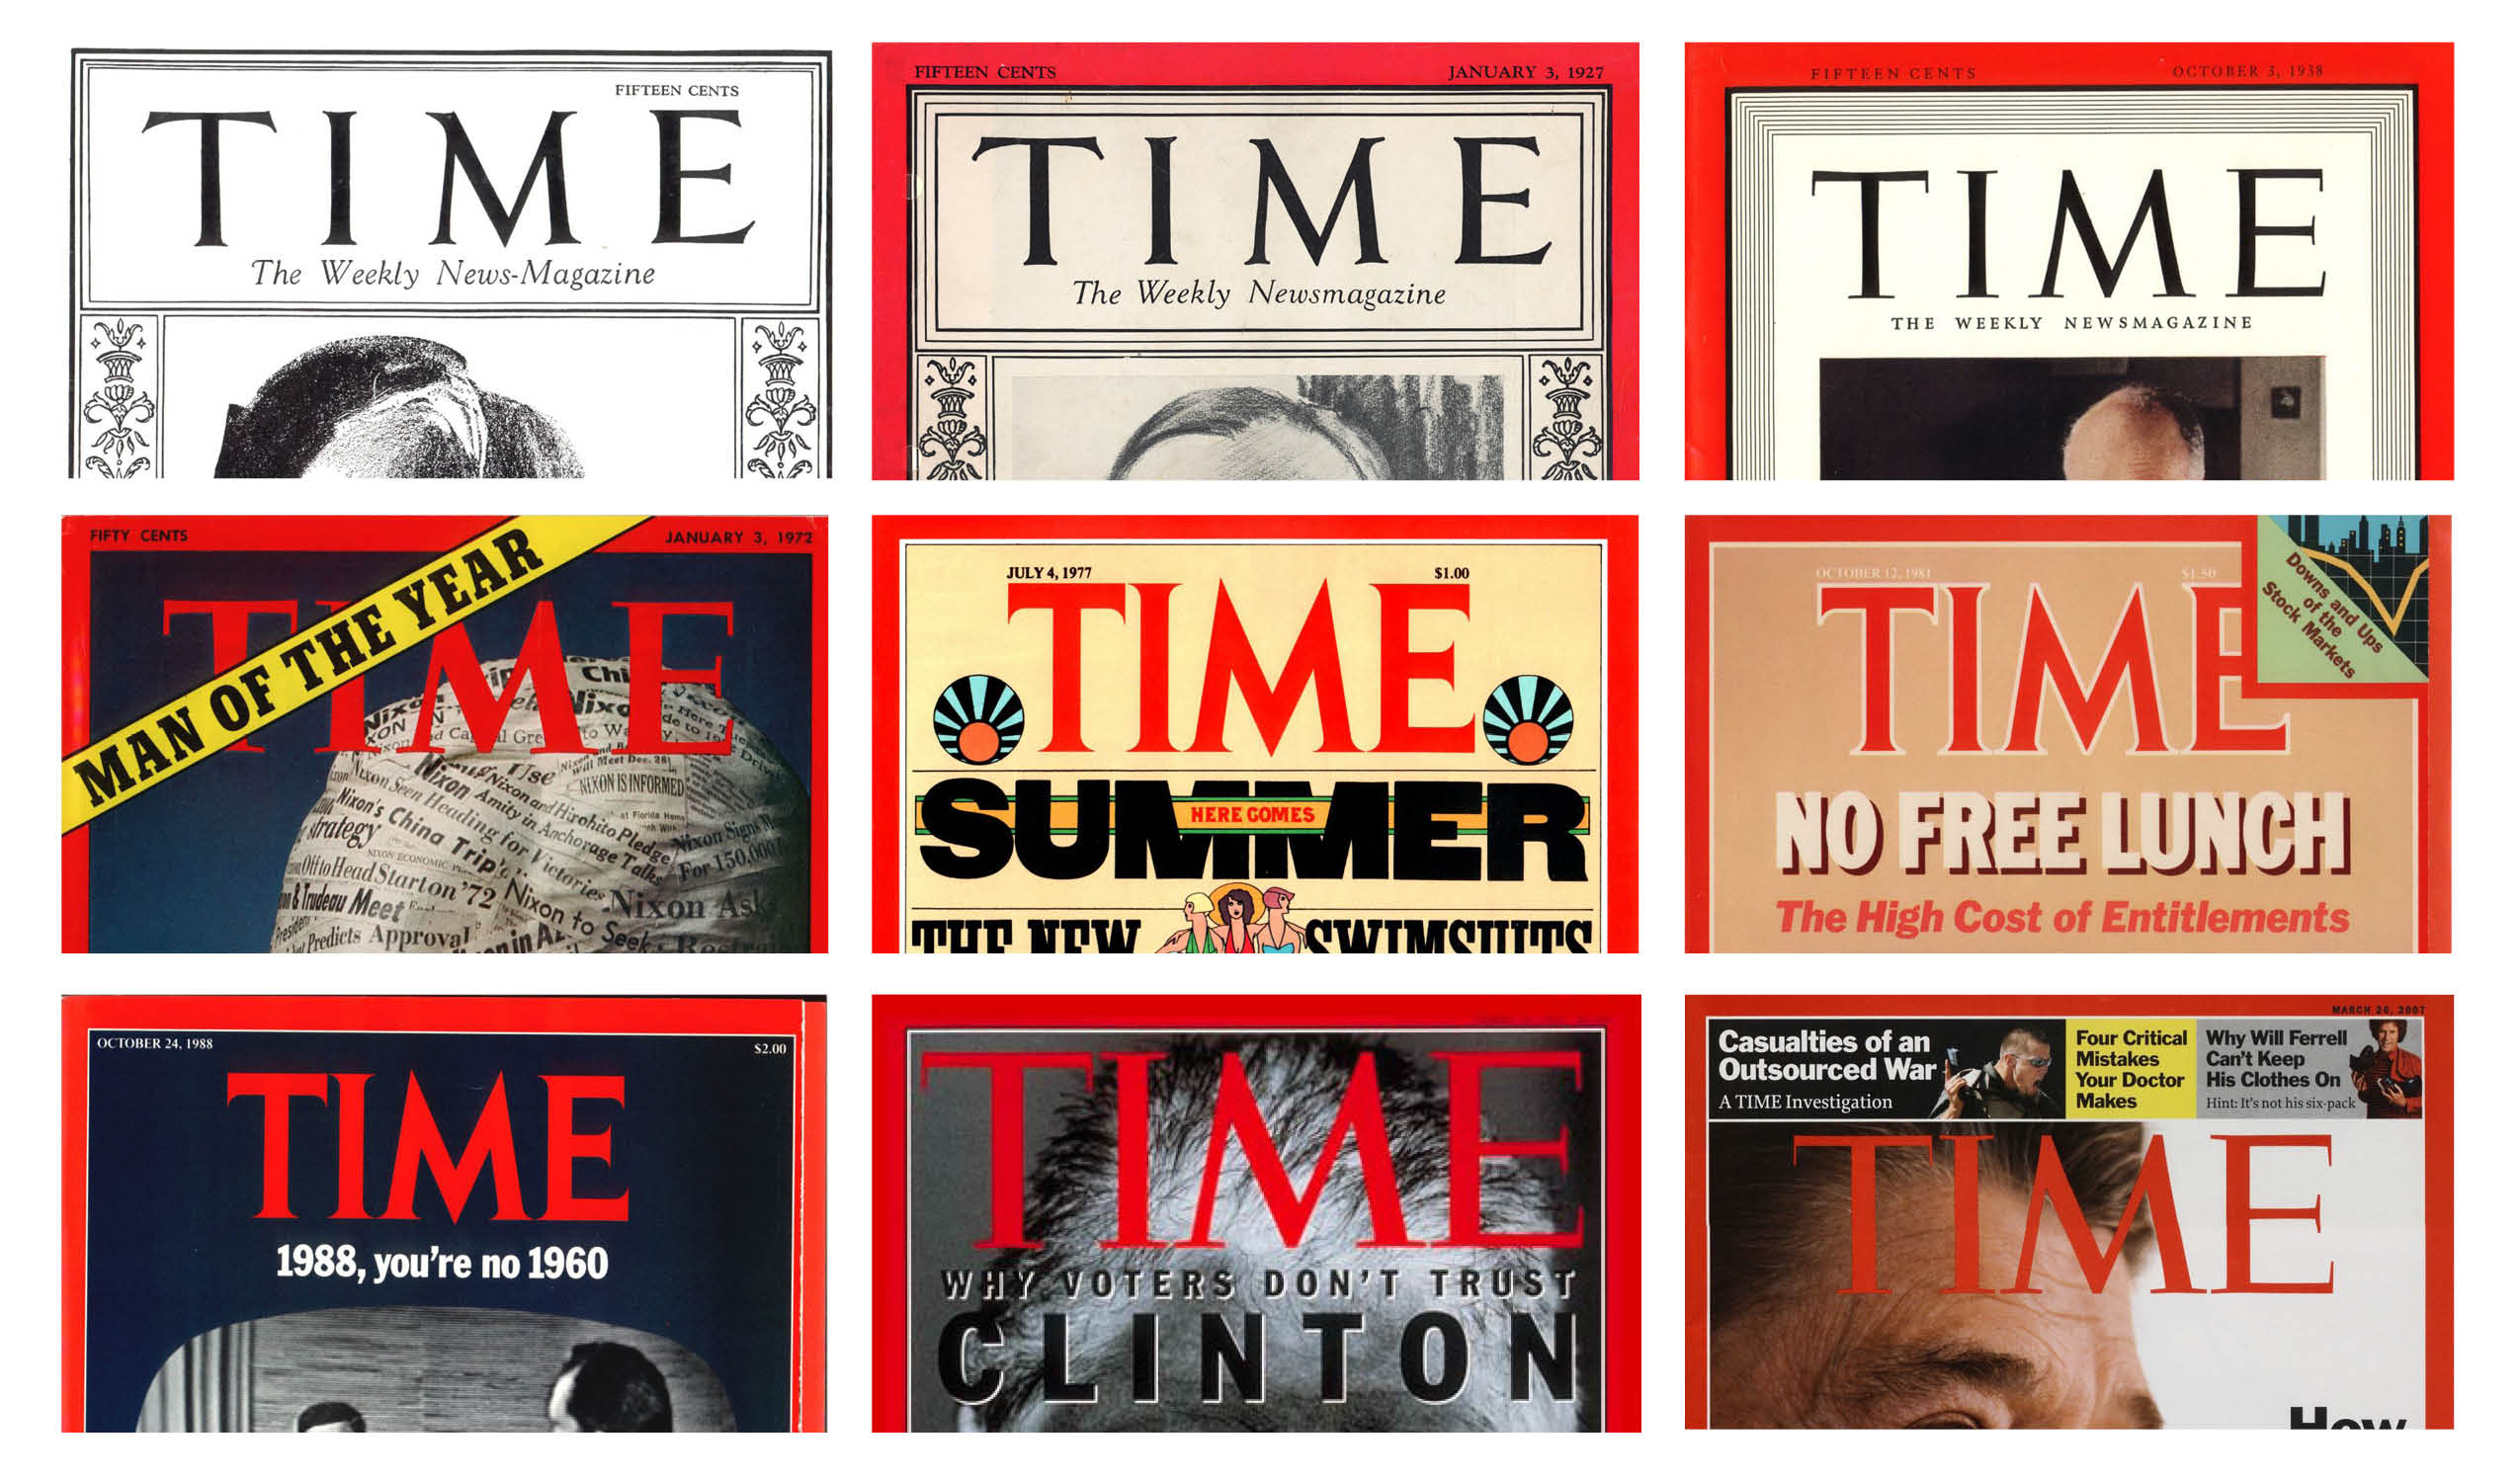 From top left: The first cover of TIME from March 3, 1923. The first red border on Jan. 3, 1927. New border design in Oct. 3, 1938. Logo changed in Jan. 3, 1972, then again in July 4, 1977. A white outline was added in Oct. 12, 1981. It was then removed starting with the Oct. 24, 1988 issue. The current logo, at a size that spanned the width of the cover, was first implemented in April 20, 1992. The first issue of the redesign was Mar. 26, 2007.